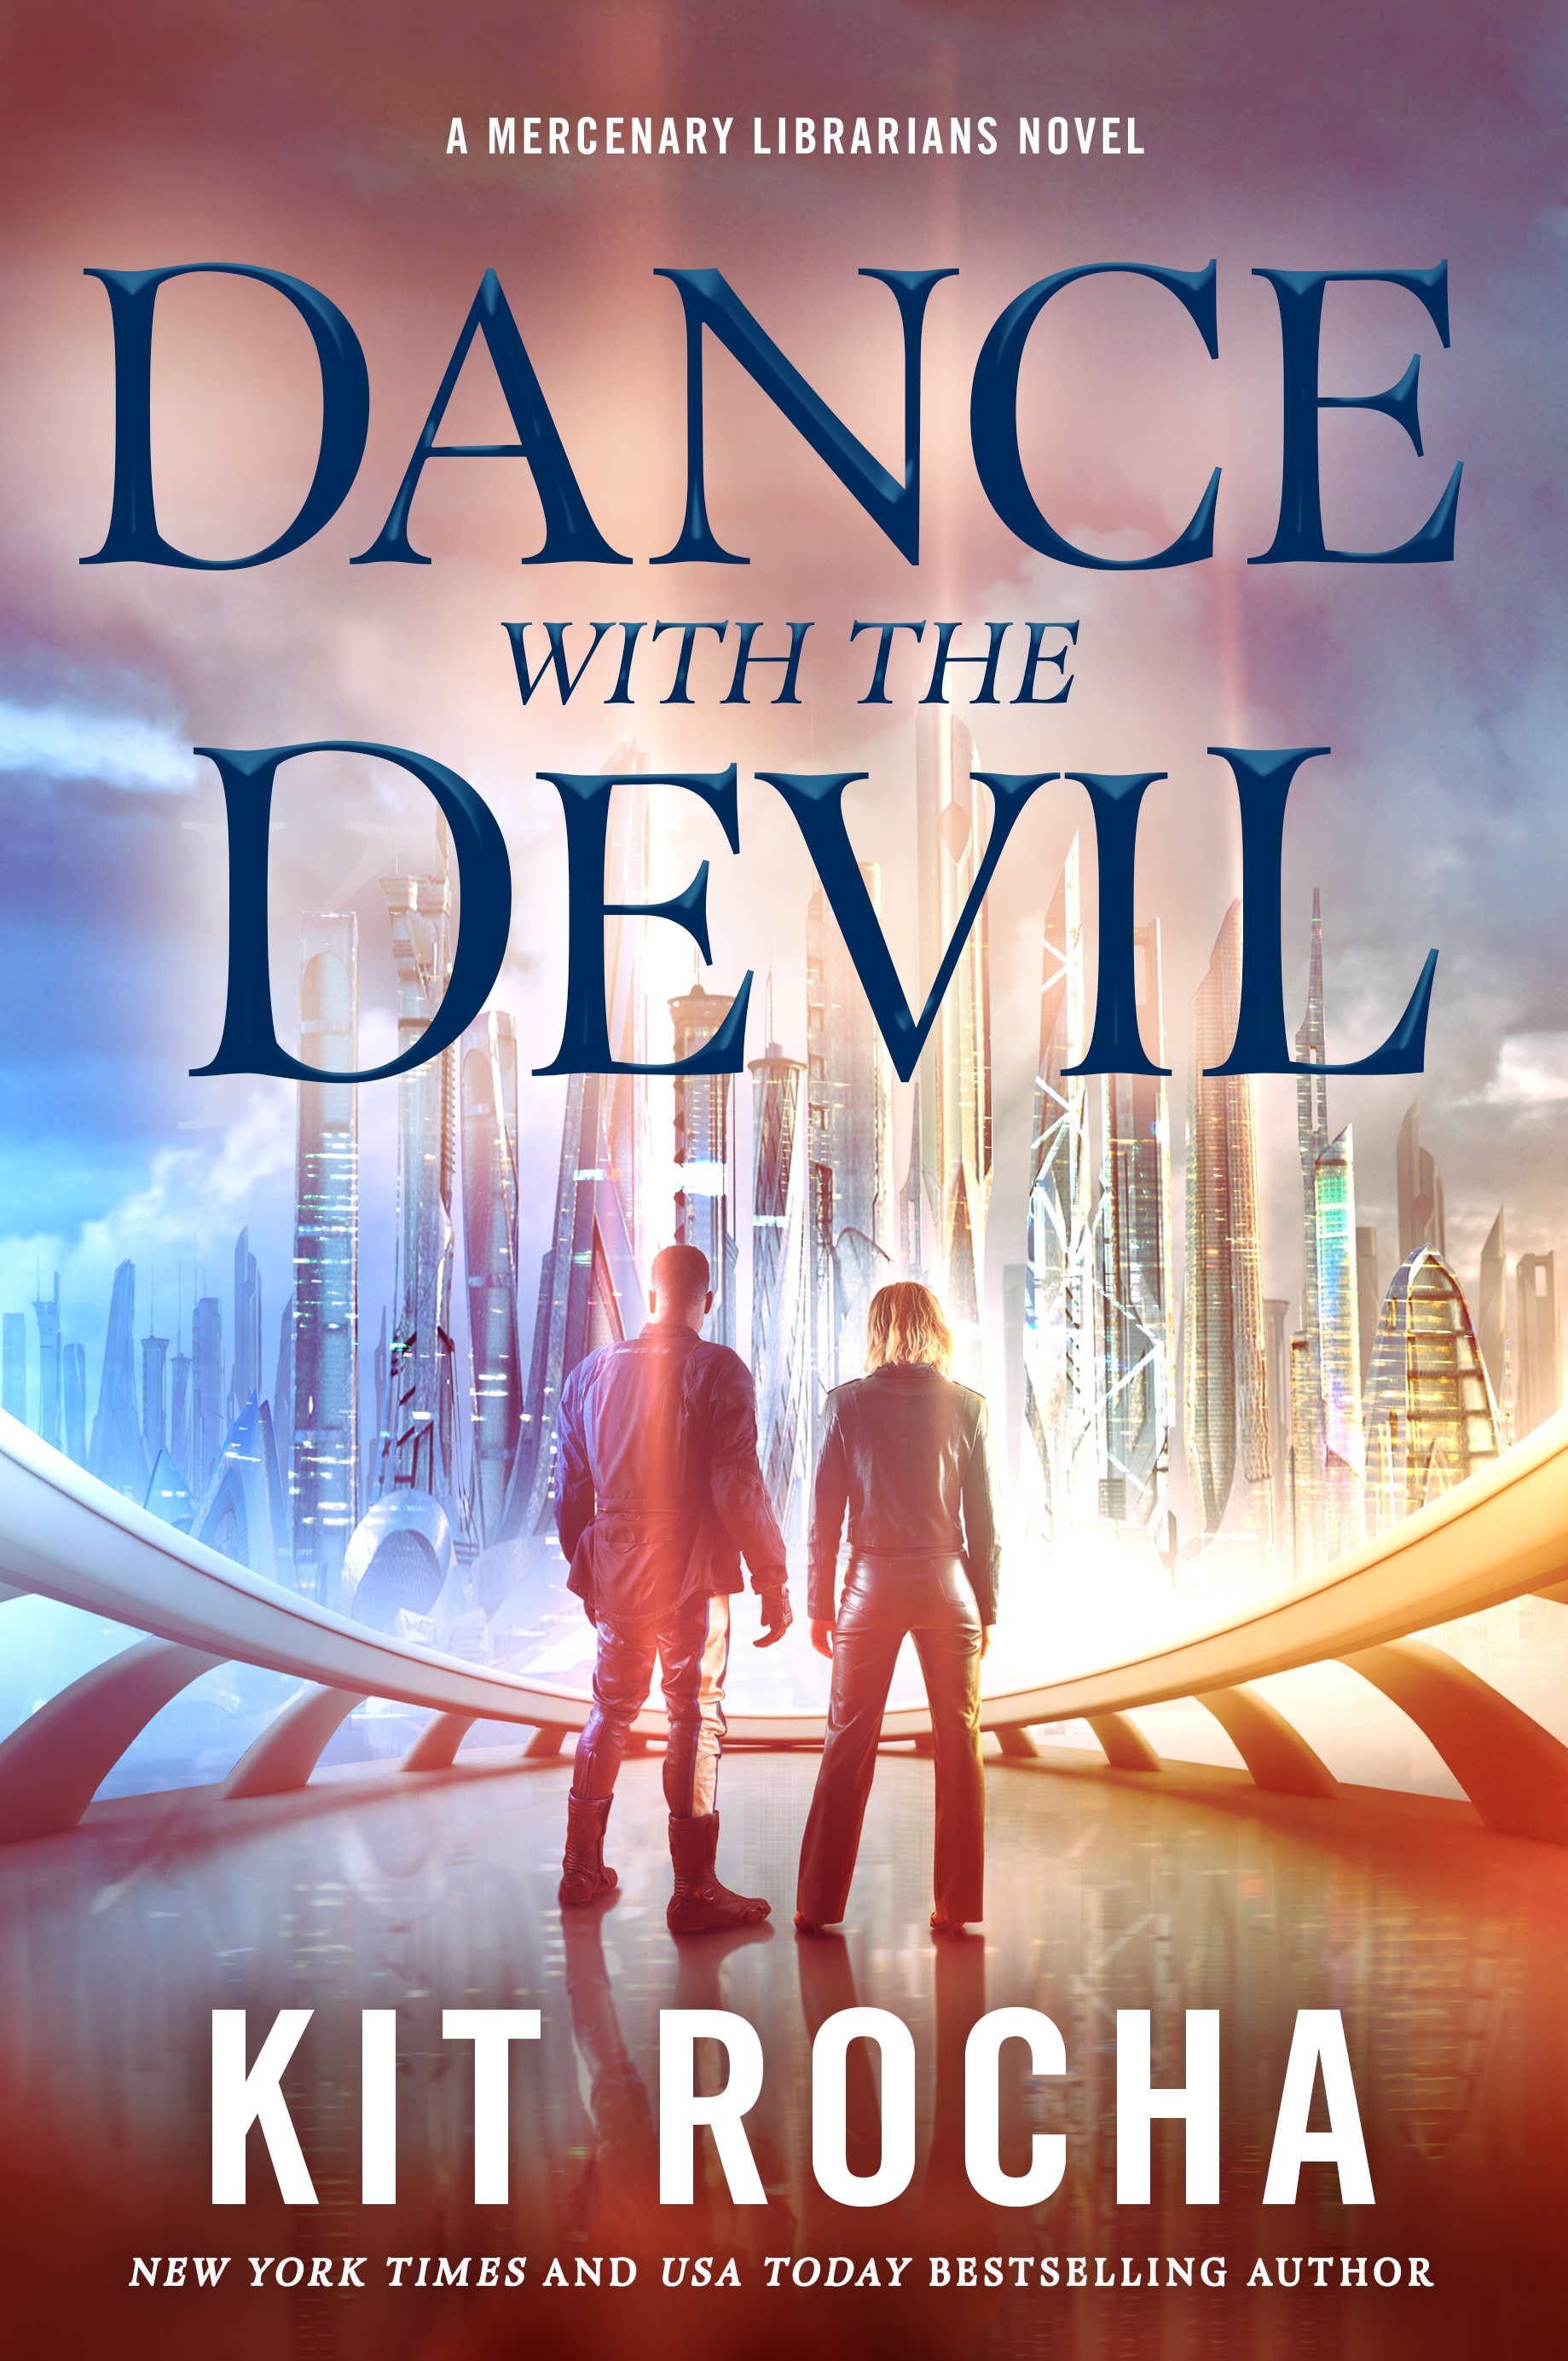 Dance with the Devil : A Mercenary Librarians Novel by Kit Rocha